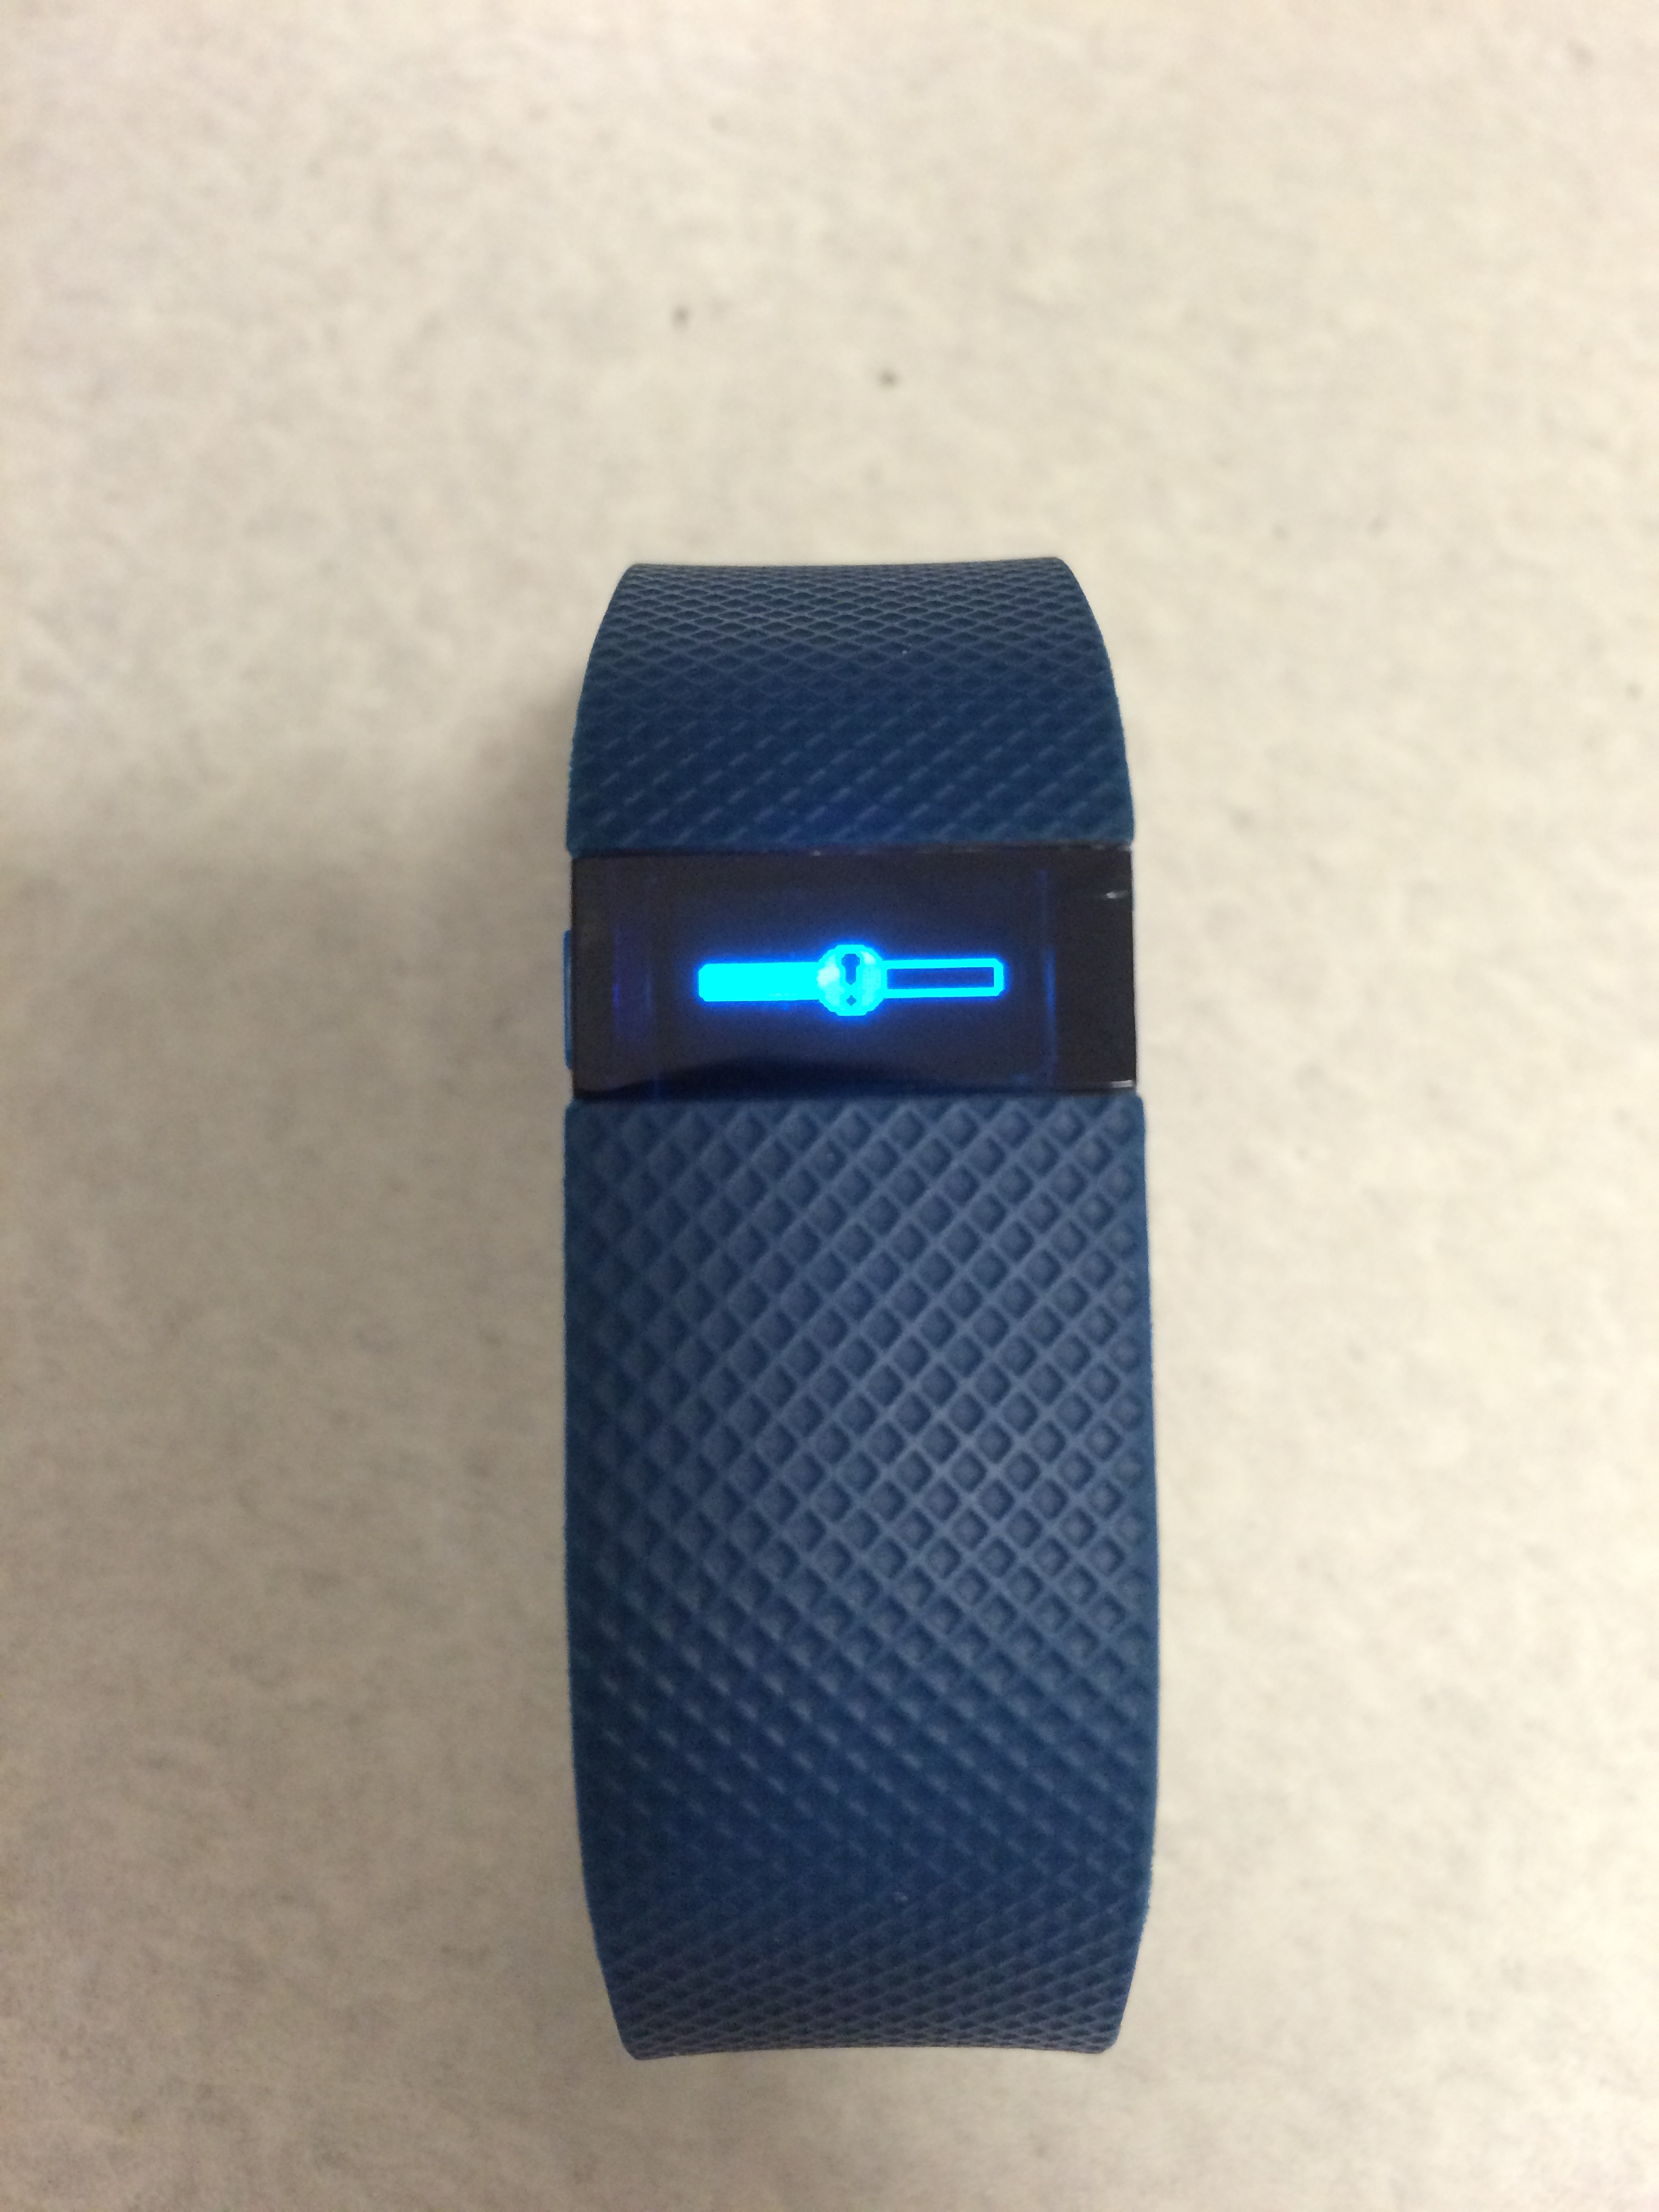 fitbit charge hr battery life